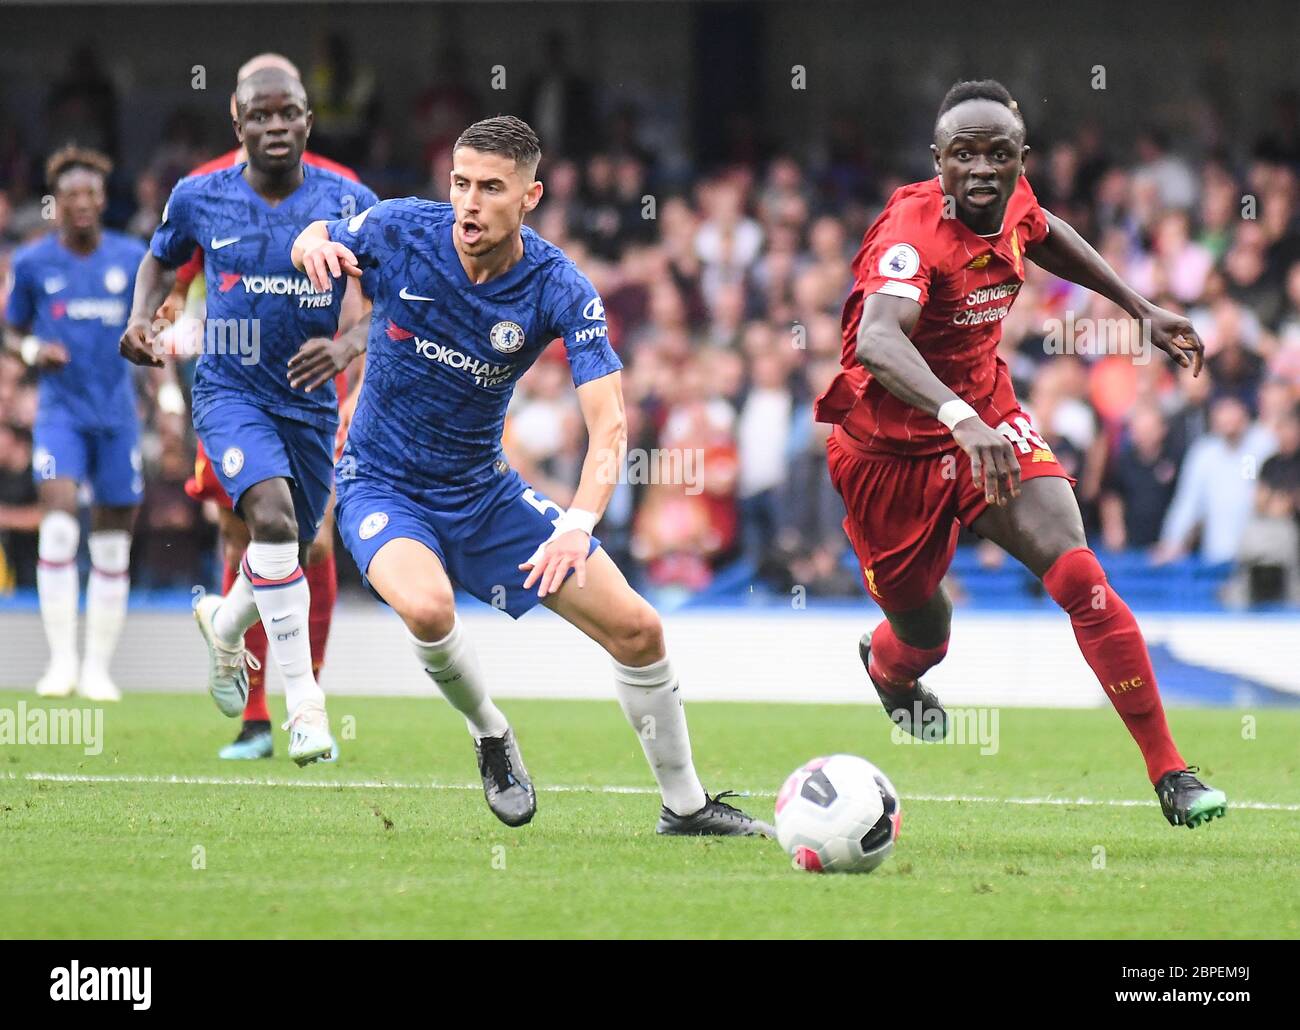 LONDON, ENGLAND - SEPTEMBER 22, 2019: Jorge Luiz Frello Filho (Jorginho) of Chelsea (L) and Sadio Mane of Liverpool (R) pictured during the 2019/20 Premier League game between Chelsea FC and Liverpool FC at Stamford Bridge. Stock Photo